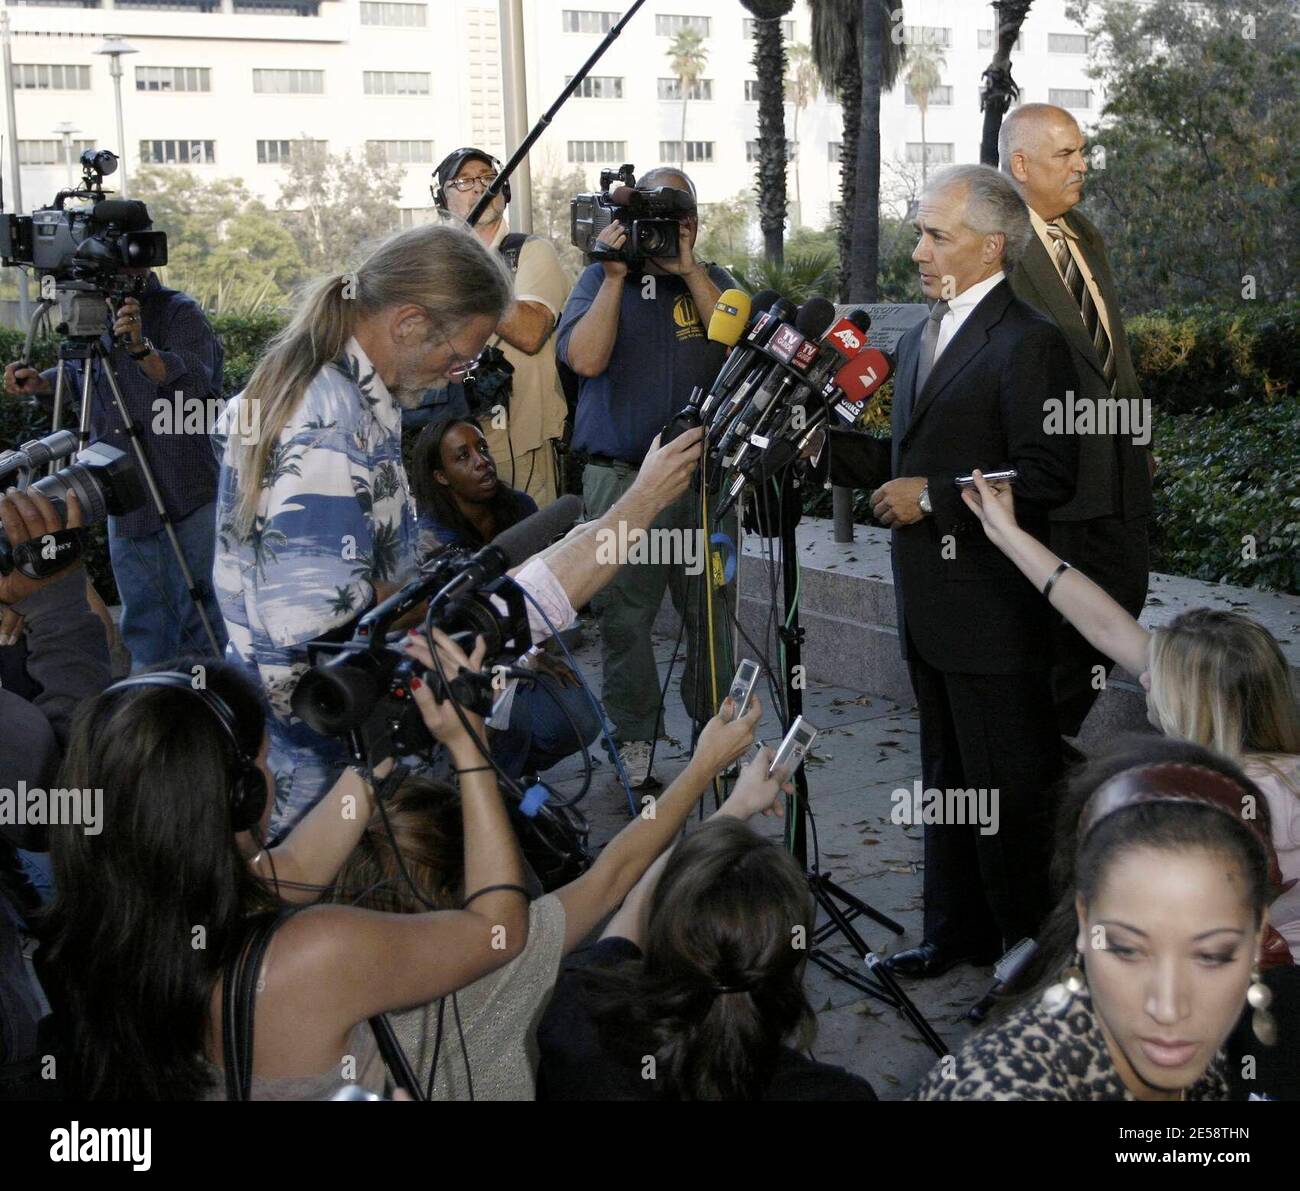 Kevin Federline's attorney Mark Vincent Kaplan spoke to the press shortly after the custody hearing today. He told the media that a written ruling would be made by the court Monday or Tuesday and that the current custody ruling had been extended over the weekend. Los Angeles, Calif. 10/26/07.   [[rac ral laj]] Stock Photo